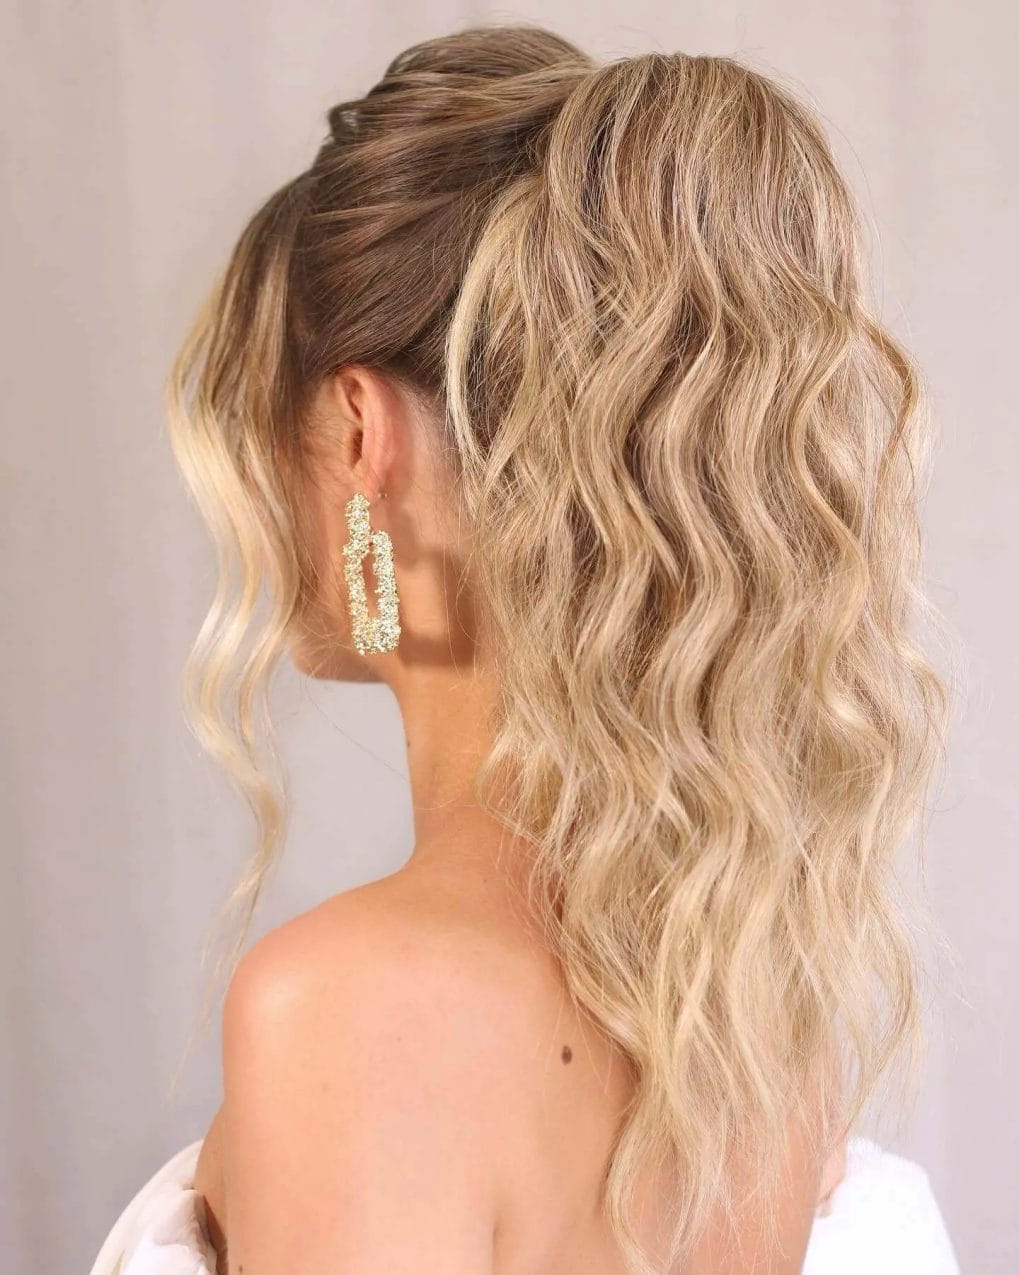 Long flowing waves with a sun-kissed half-back twist for a relaxed and chic birthday hairstyle.